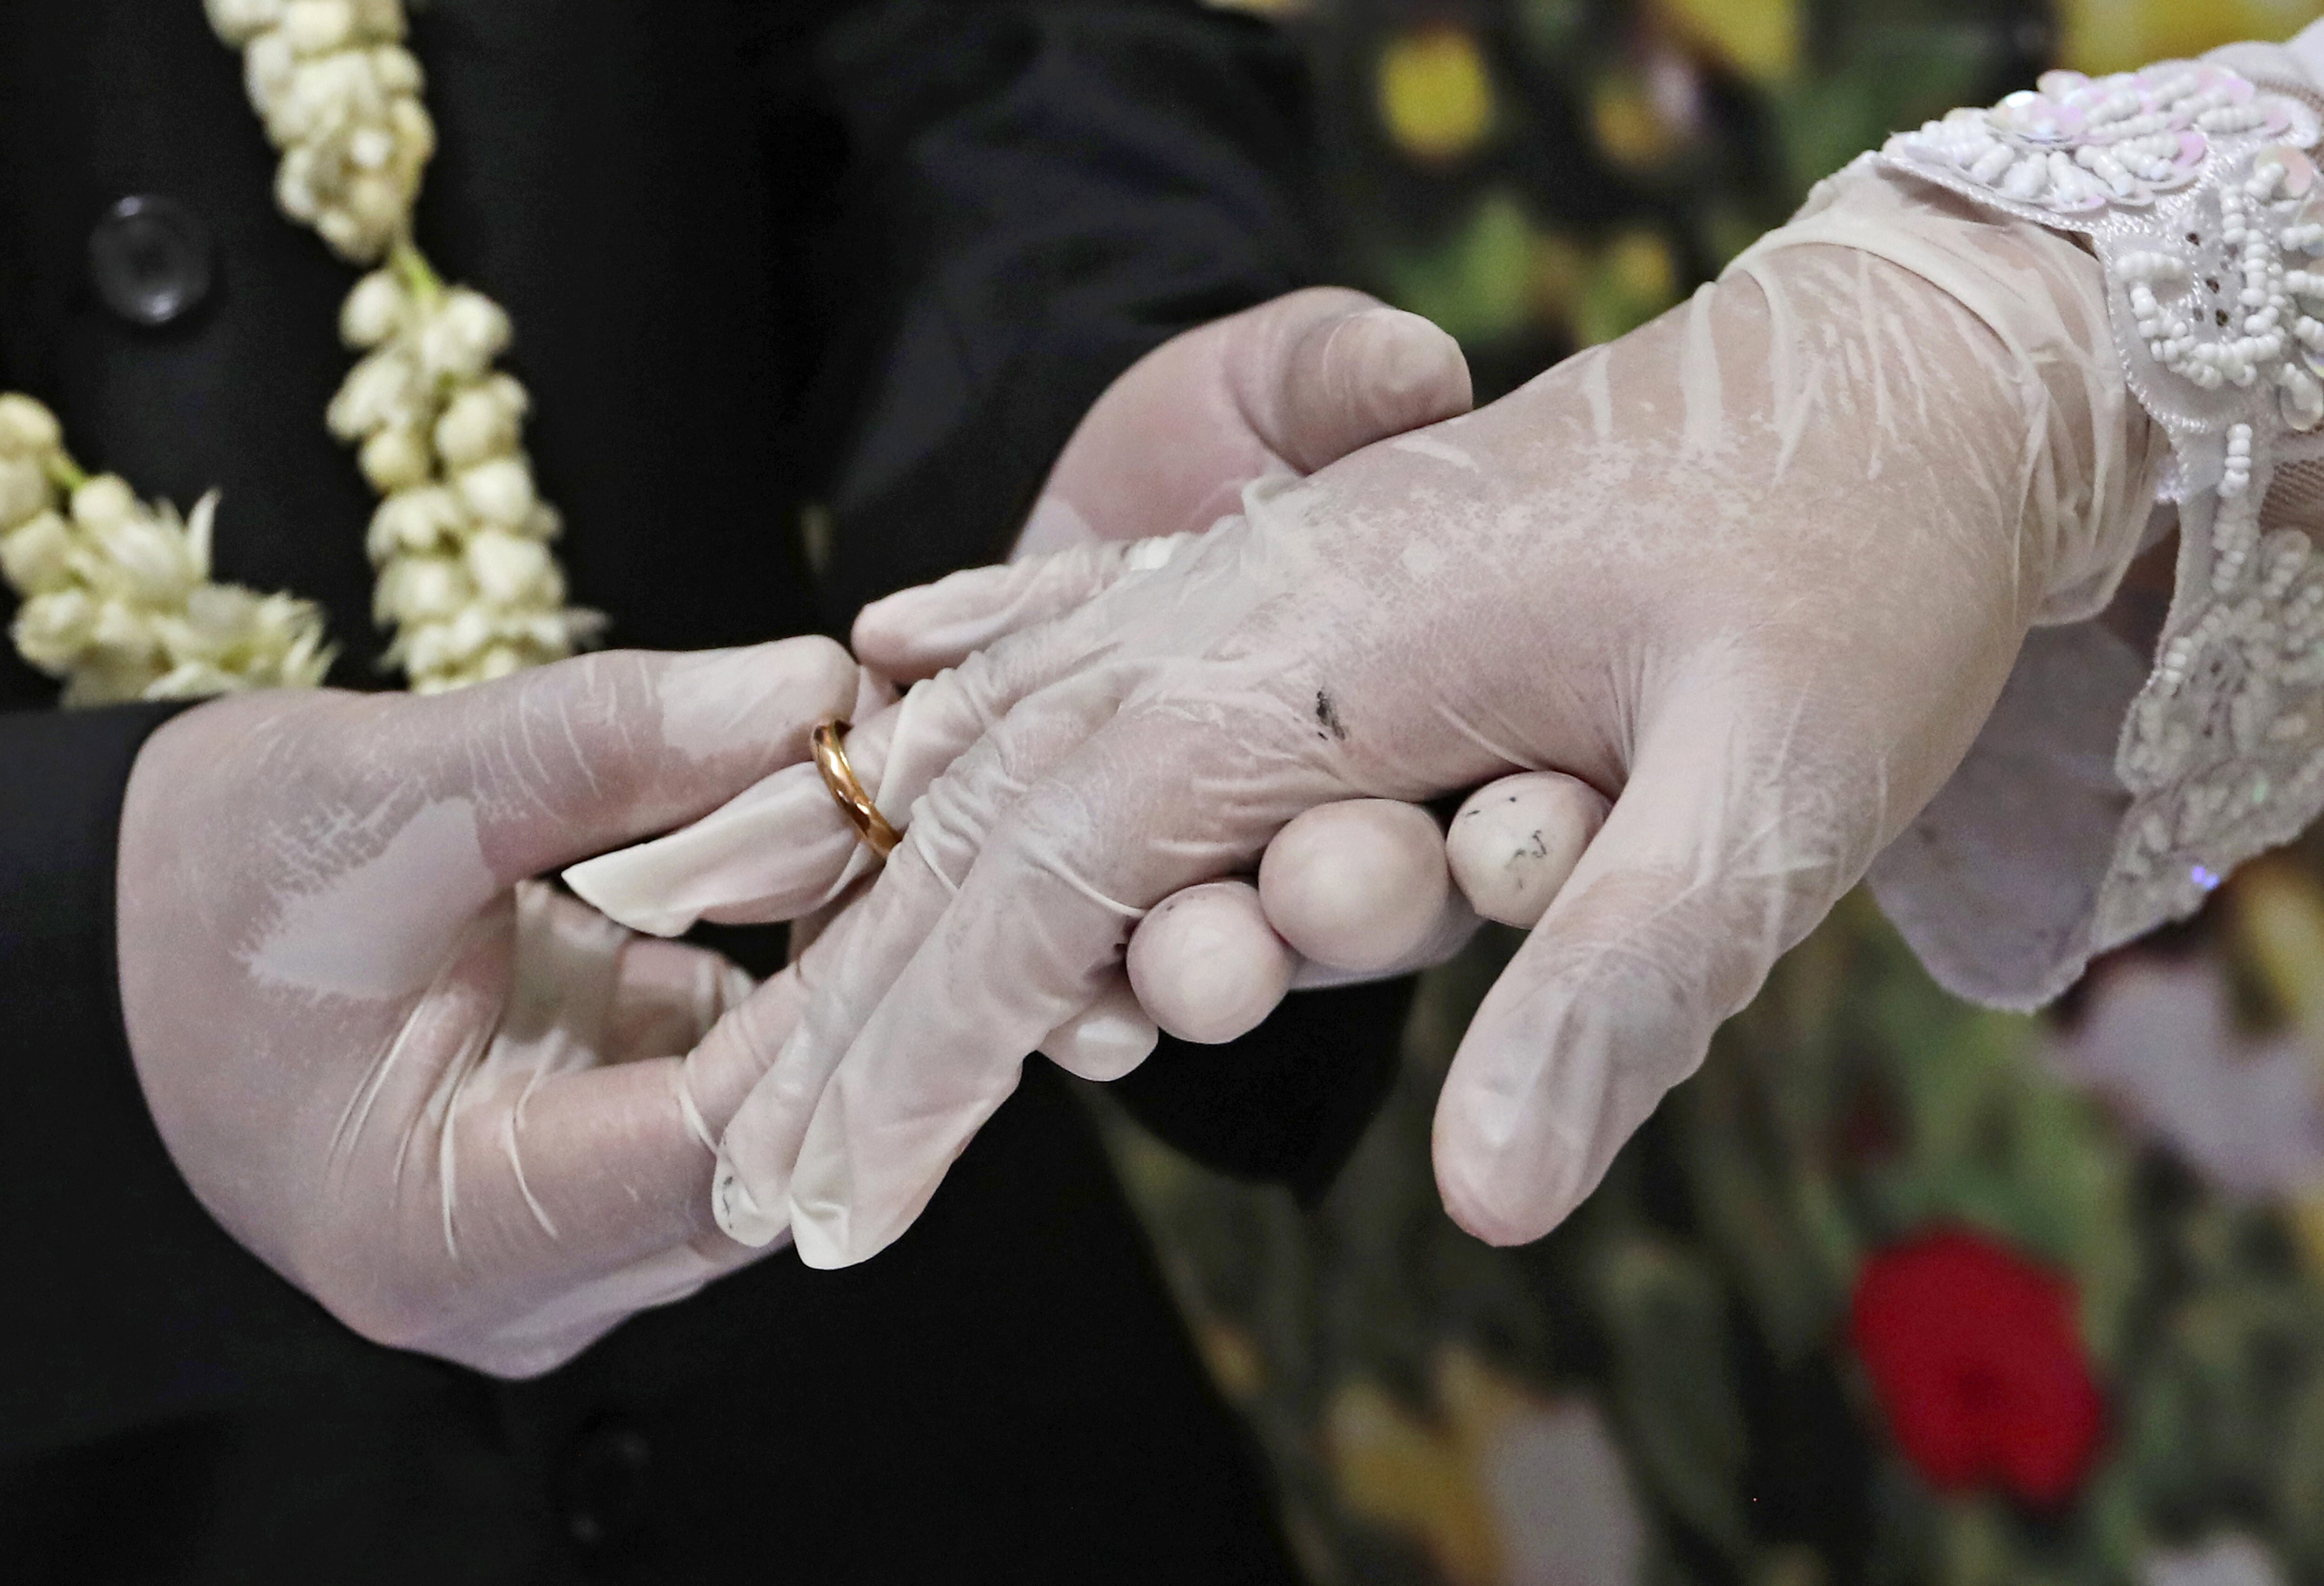 Wearing latex gloves to prevent the spread of the coronavirus, a bride and groom exchange rings during their wedding ceremony in Pamulang, Indonesia. Photo: AP